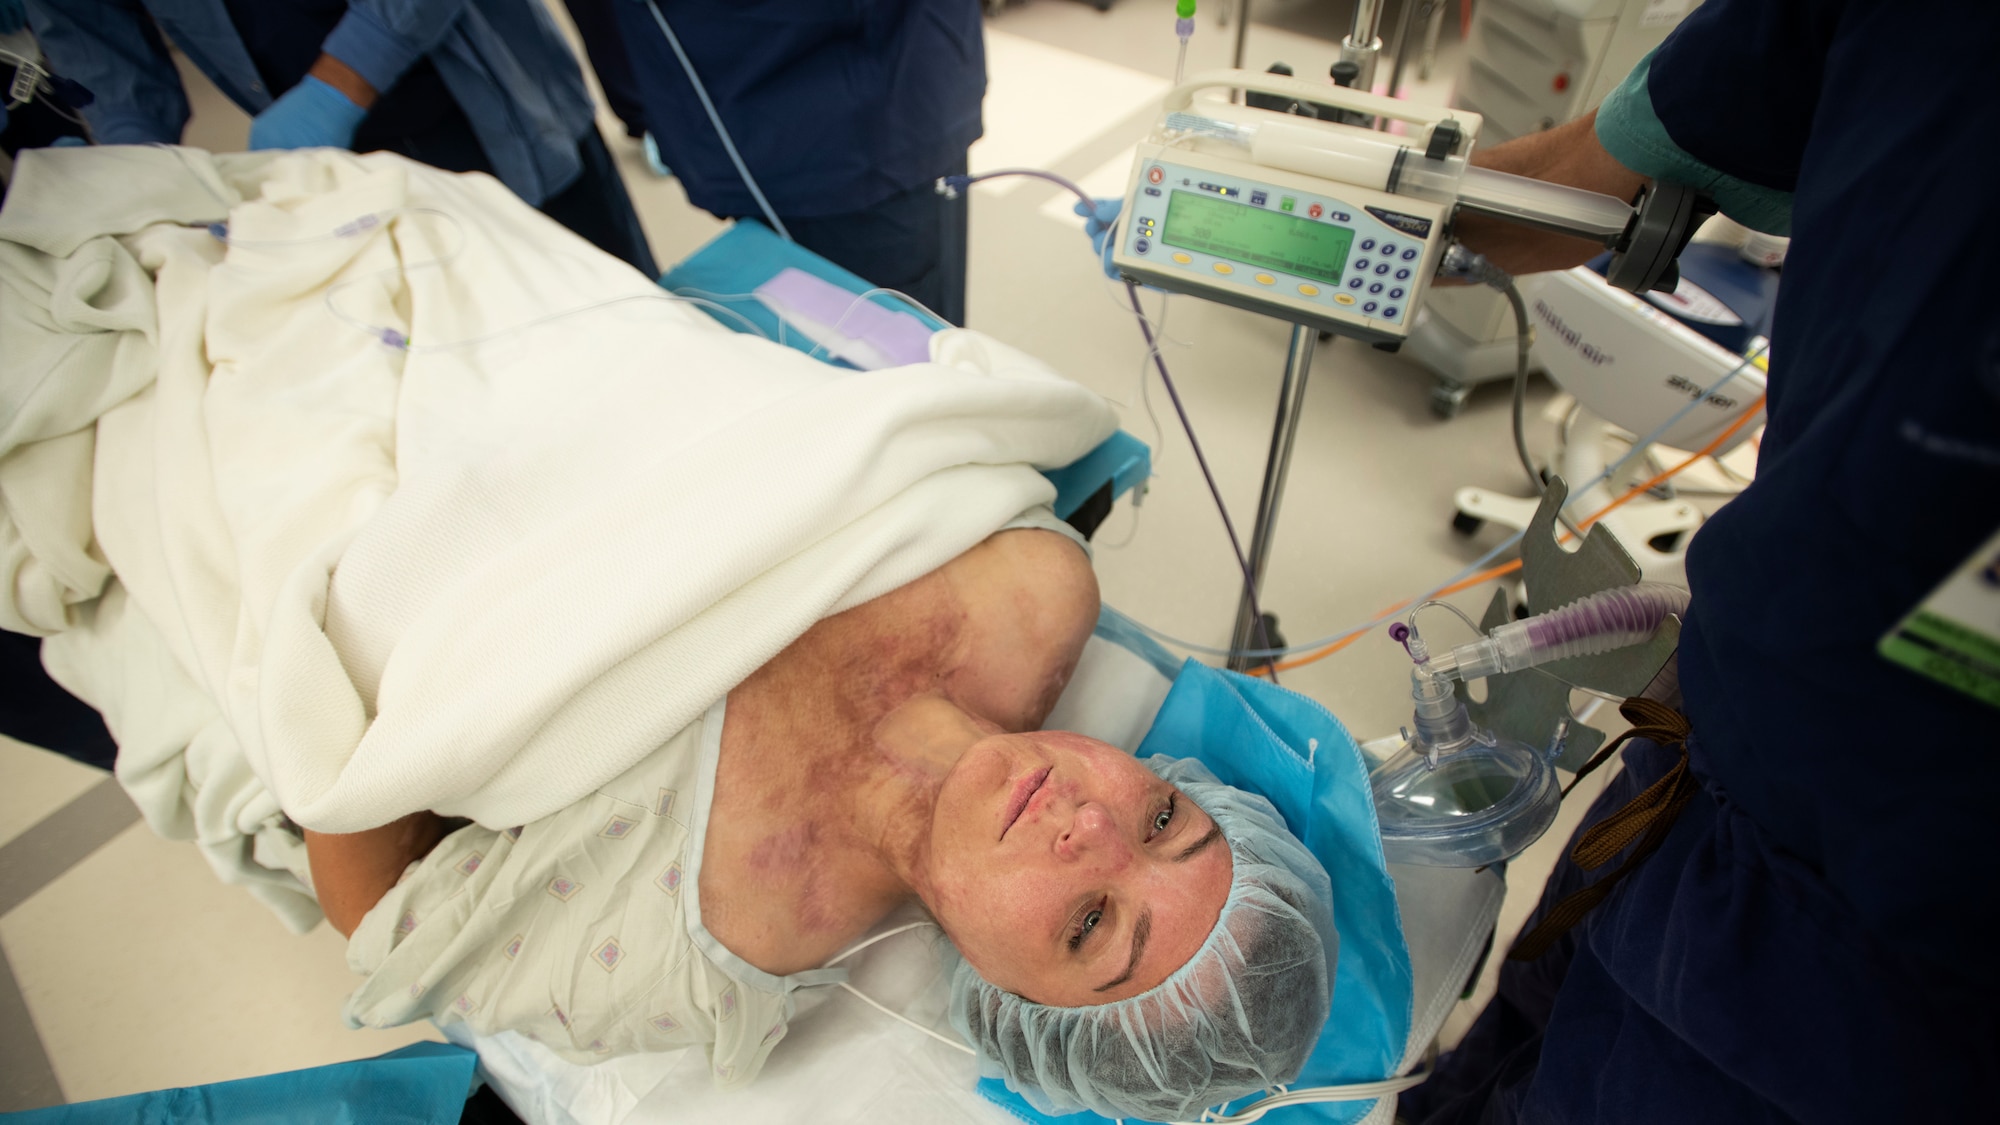 Burn scars are visible as retired U.S. Army Capt. Katie Blanchard awaits surgery Sept. 6 at Wilford Hall Ambulatory Surgical Center, Joint Base San Antonio-Lackland. Blanchard underwent fractionated carbon dioxide laser surgery to treat her injuries.